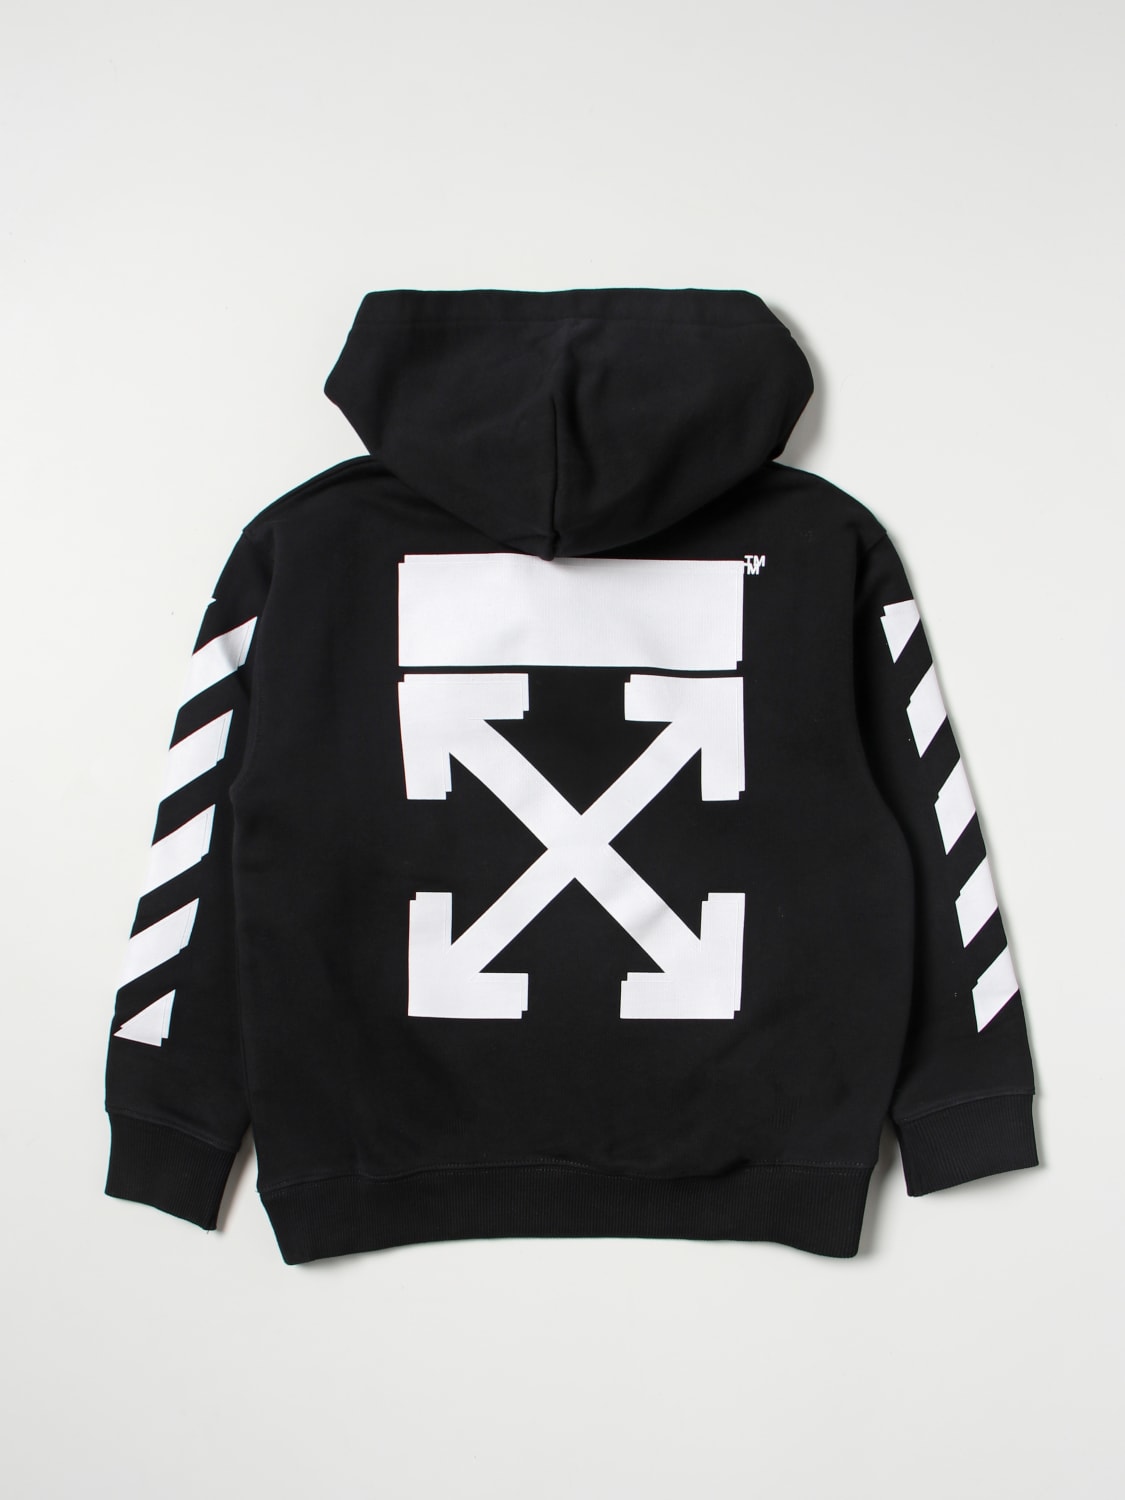 OFF-WHITE: sweater for boys - Black